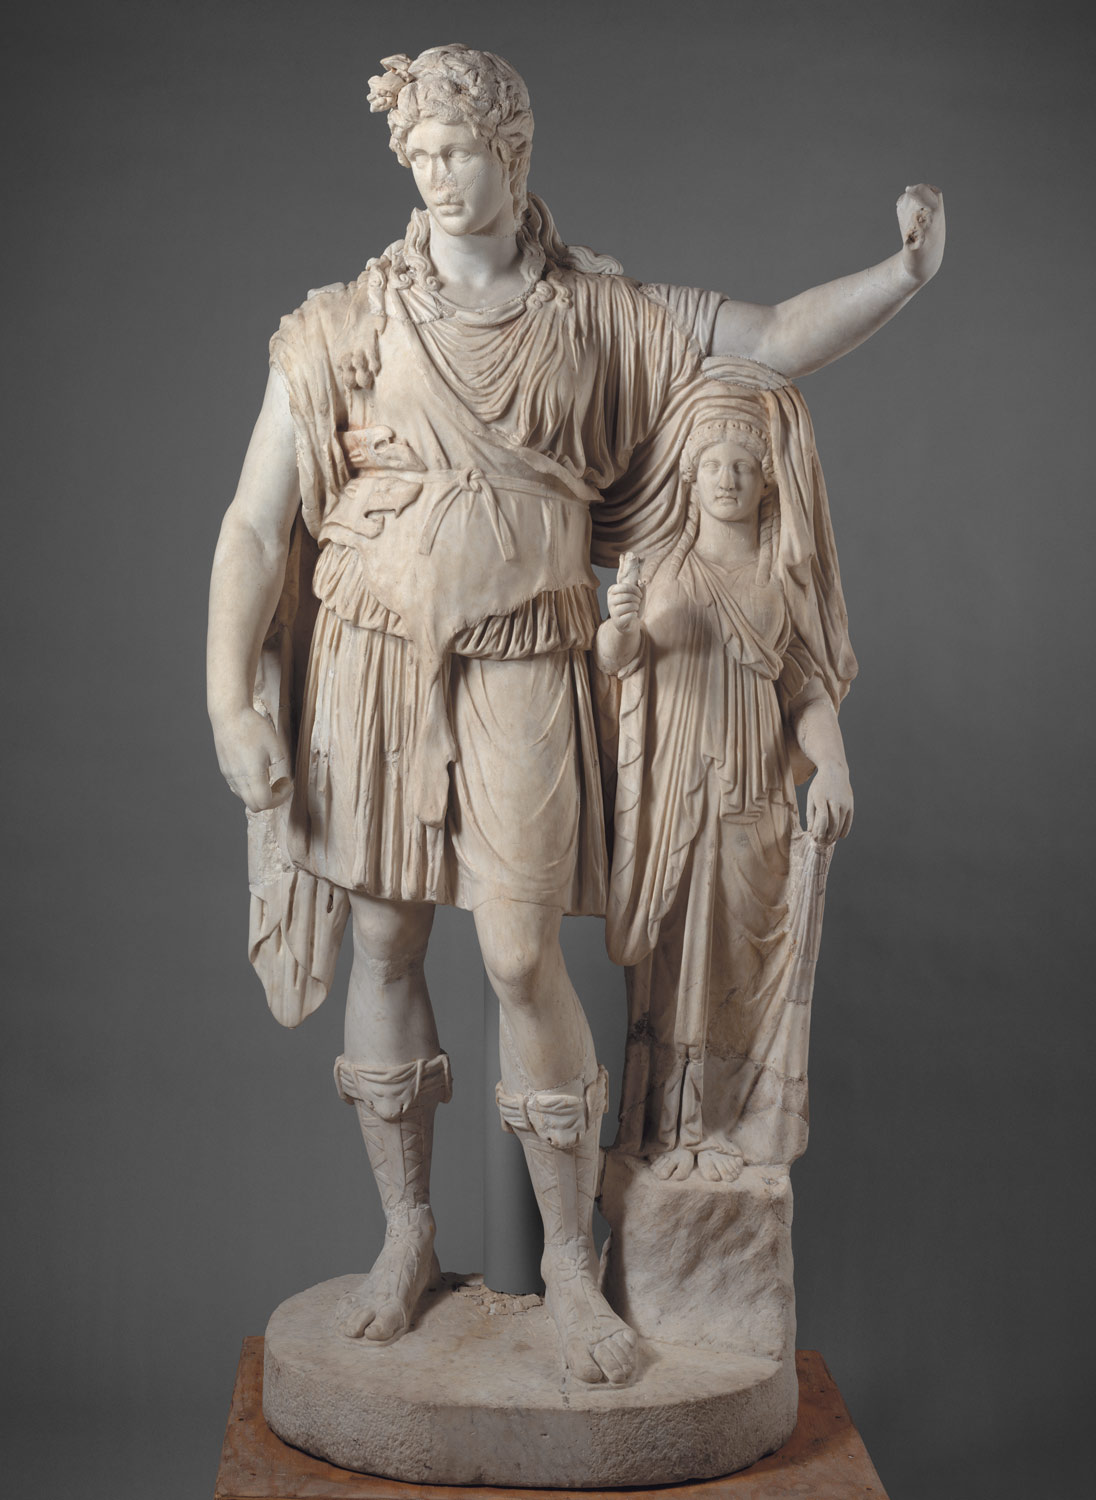 Statue of Dionysos leaning on a female figure (Hope Dionysos)